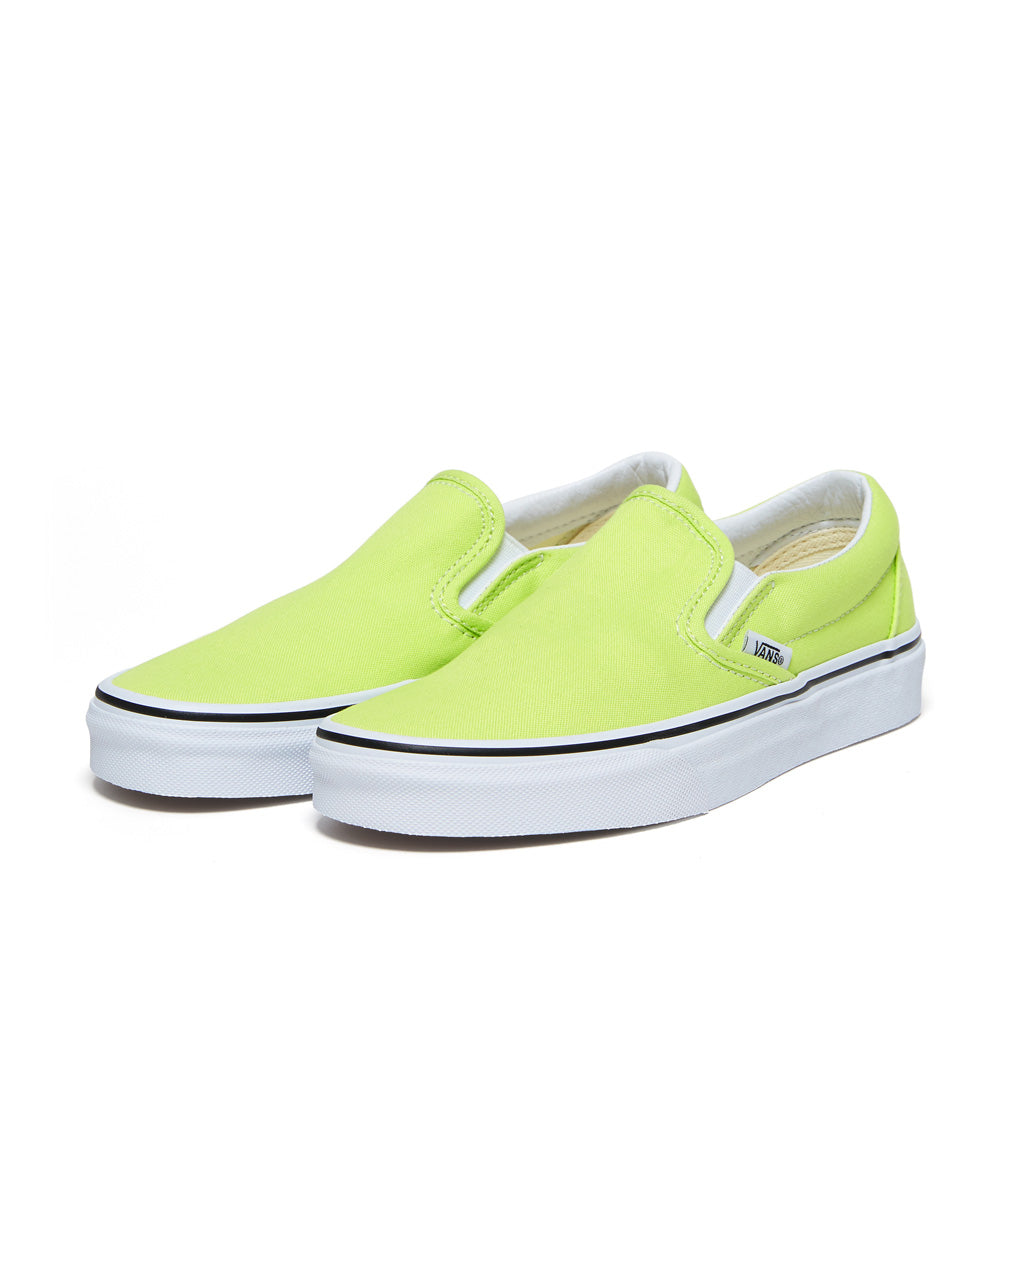 green slip on shoes